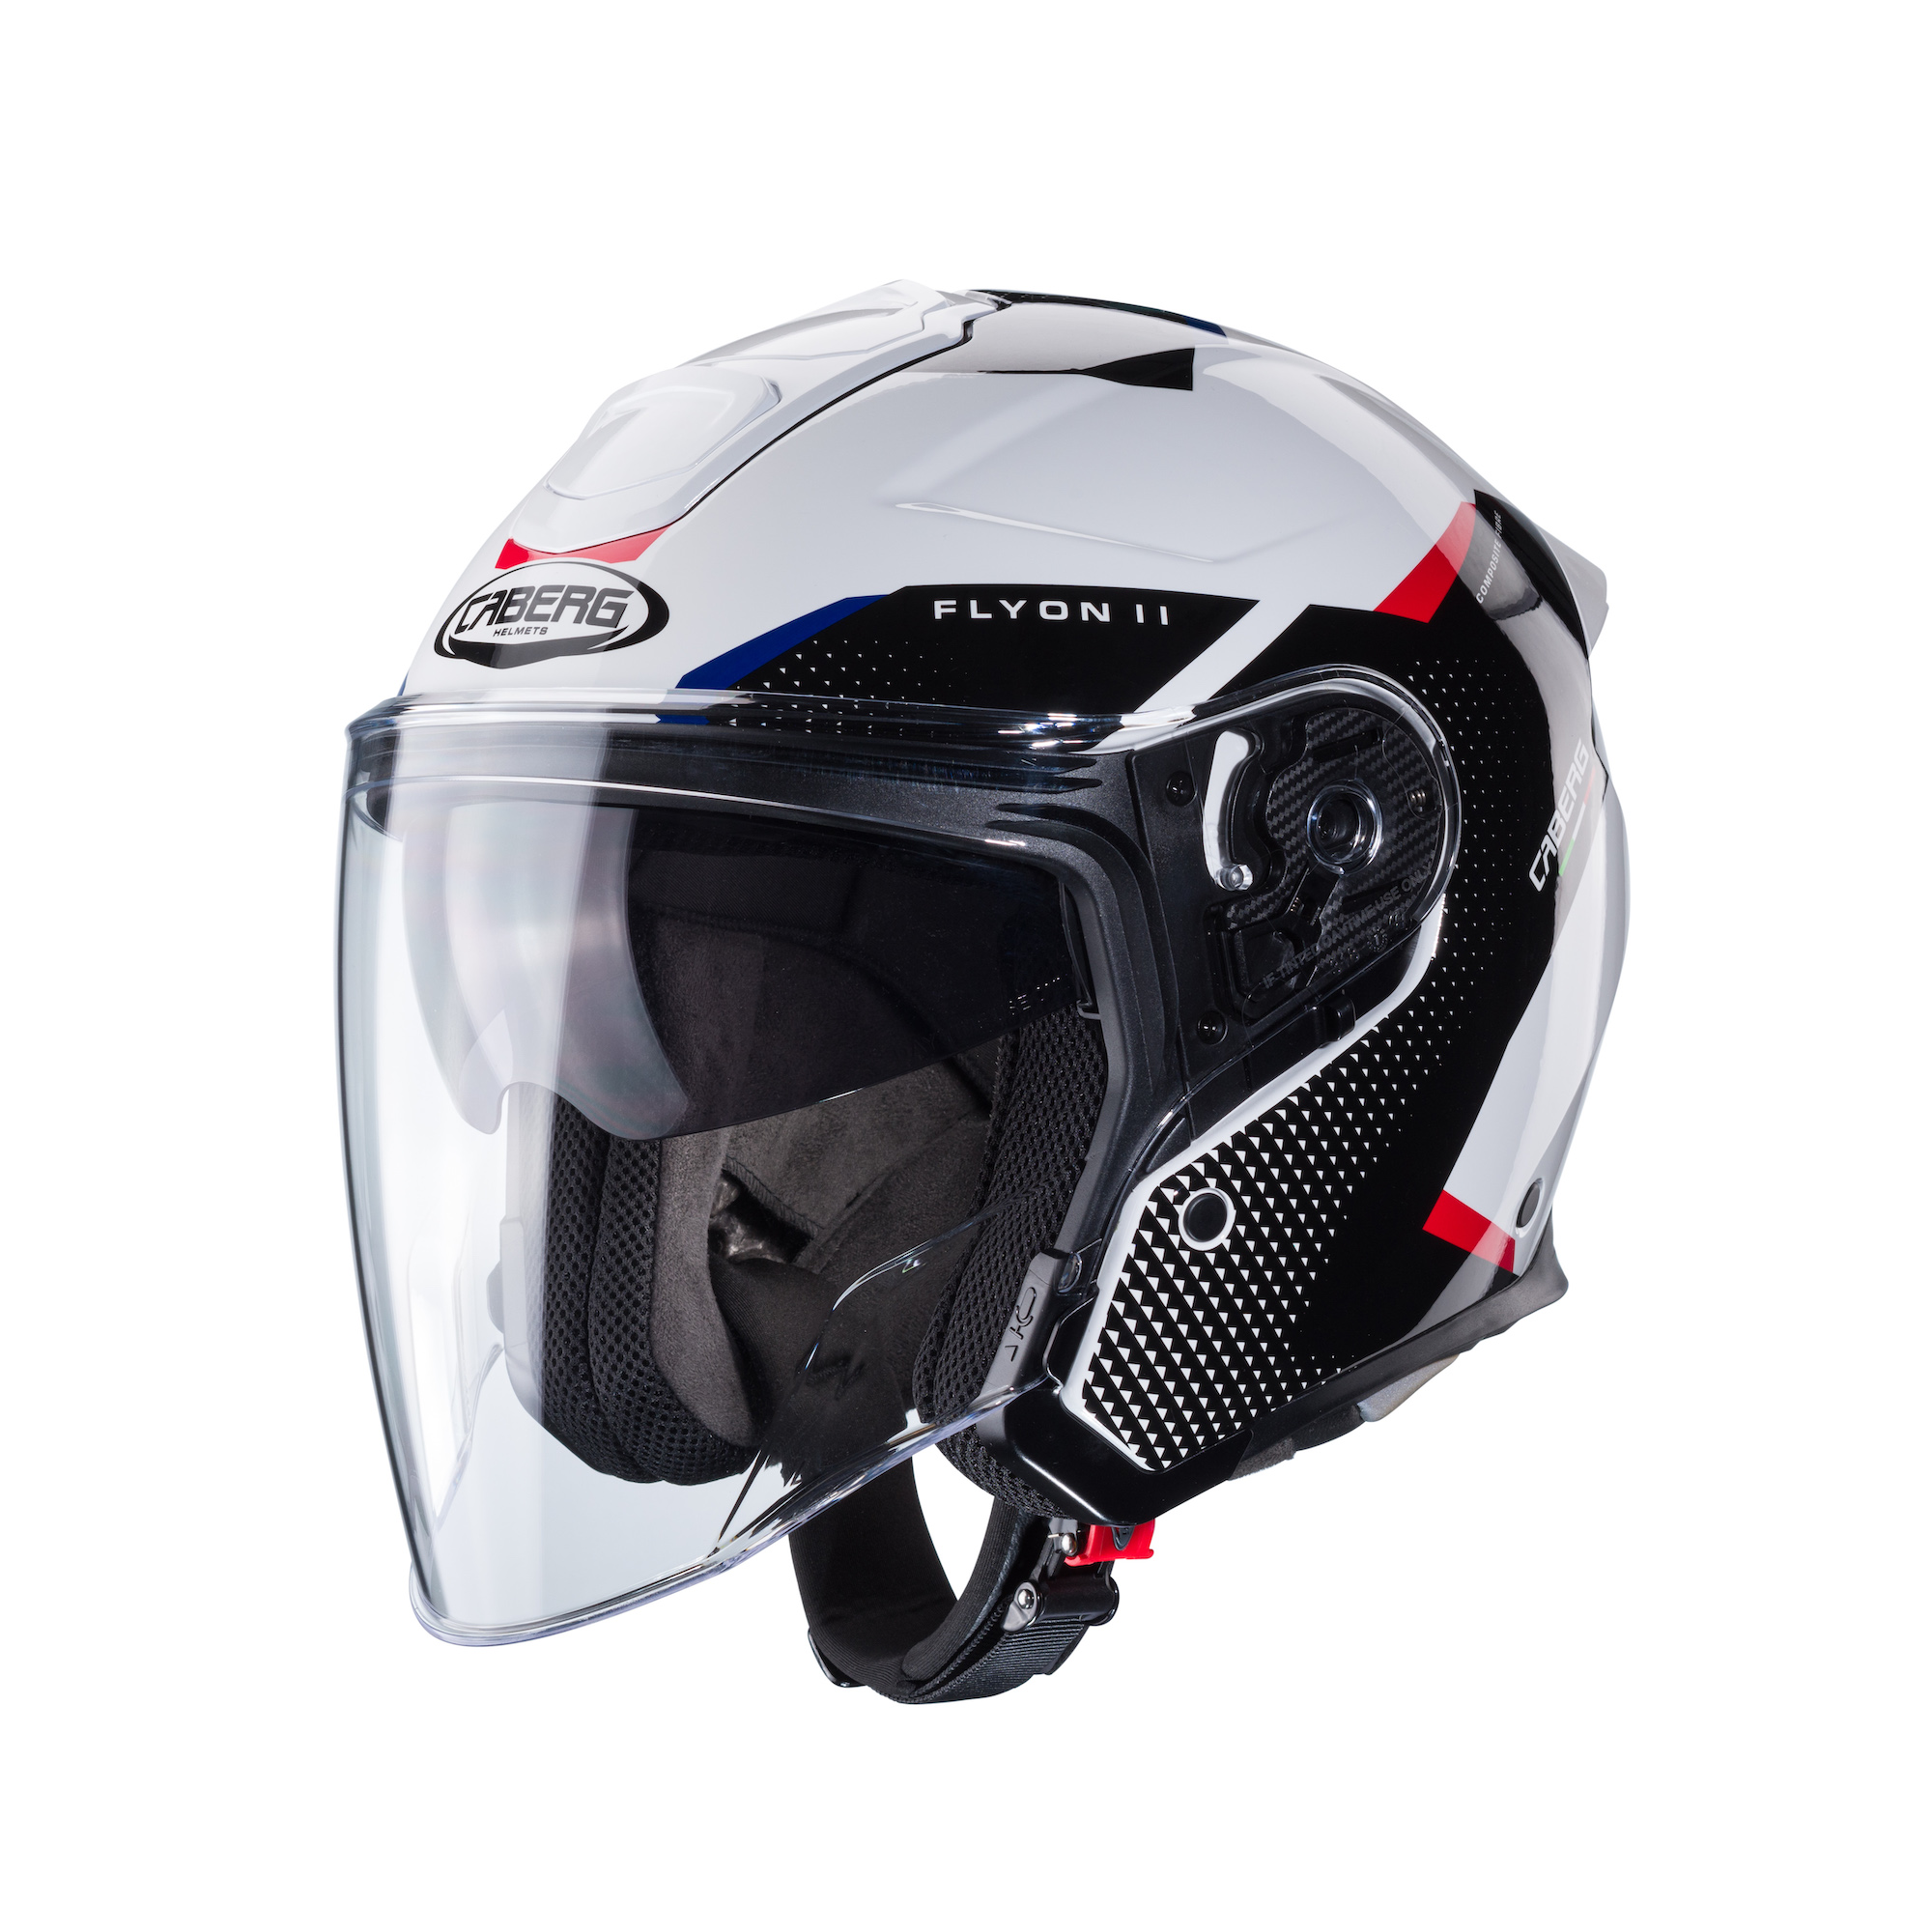 Caberg's newest Jet helmet, the FLYON II. Media sourced from Caberg's press release. 